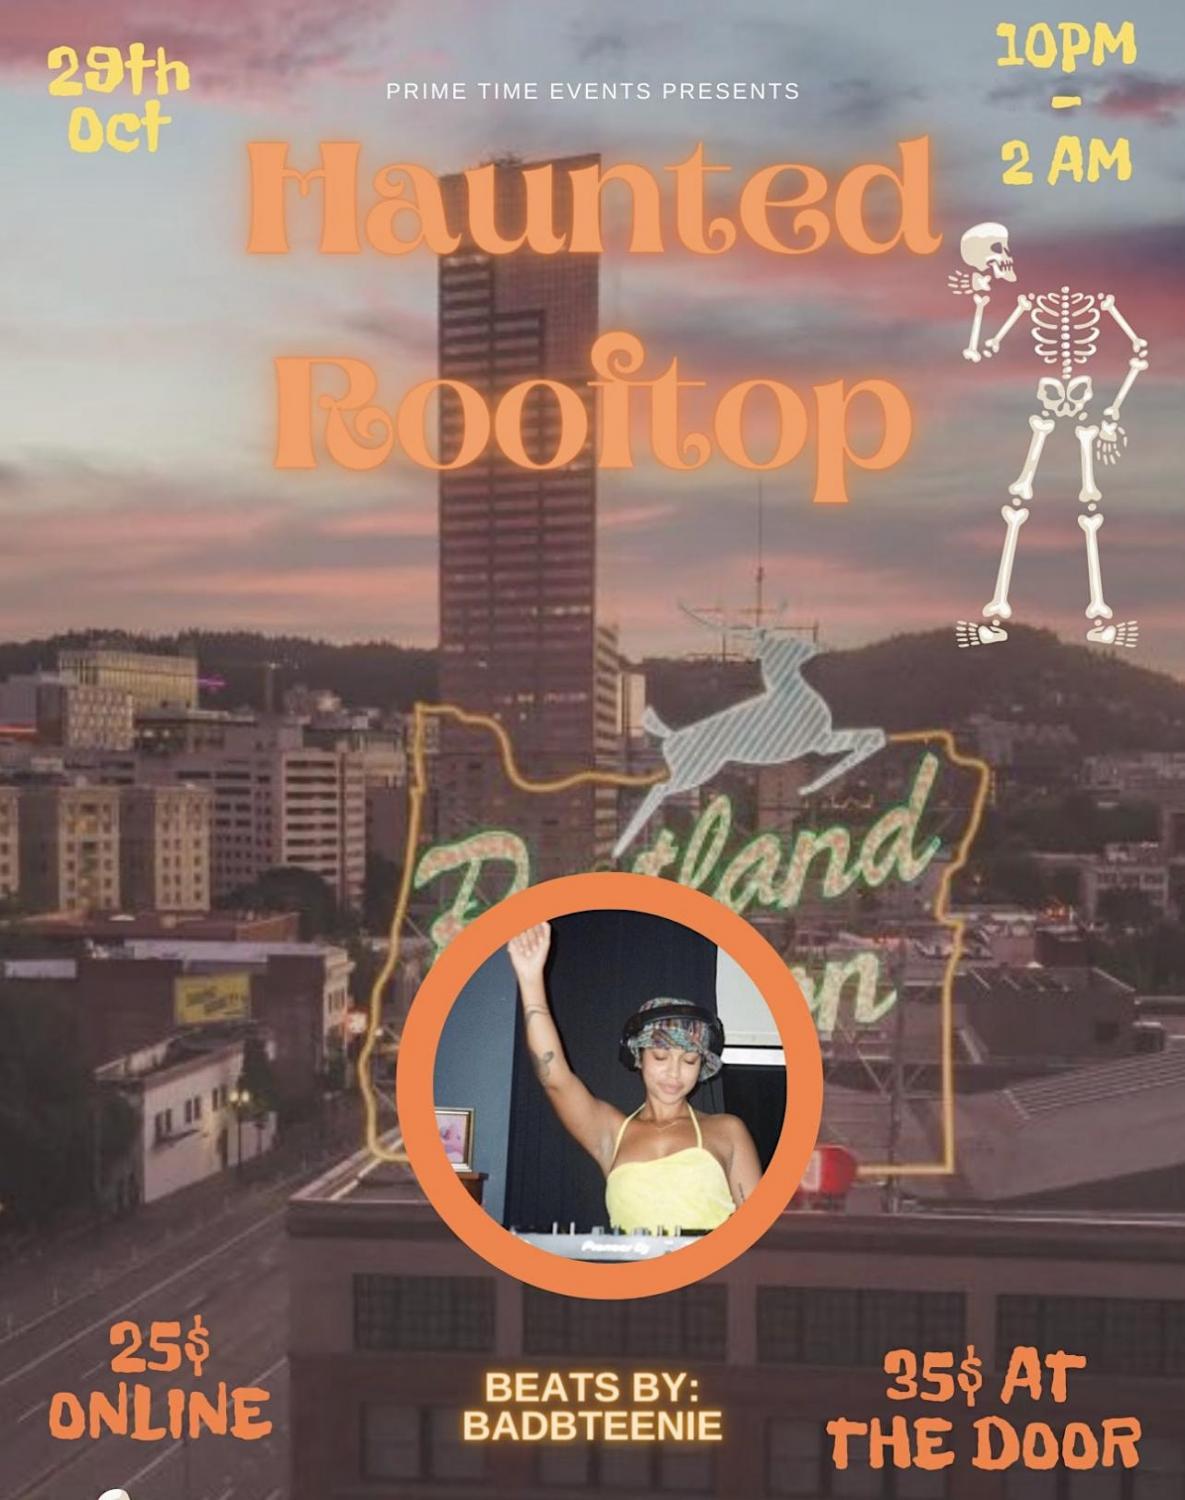 Haunted rooftop
Sat Oct 29, 10:00 PM - Sun Oct 30, 2:30 AM
in 10 days